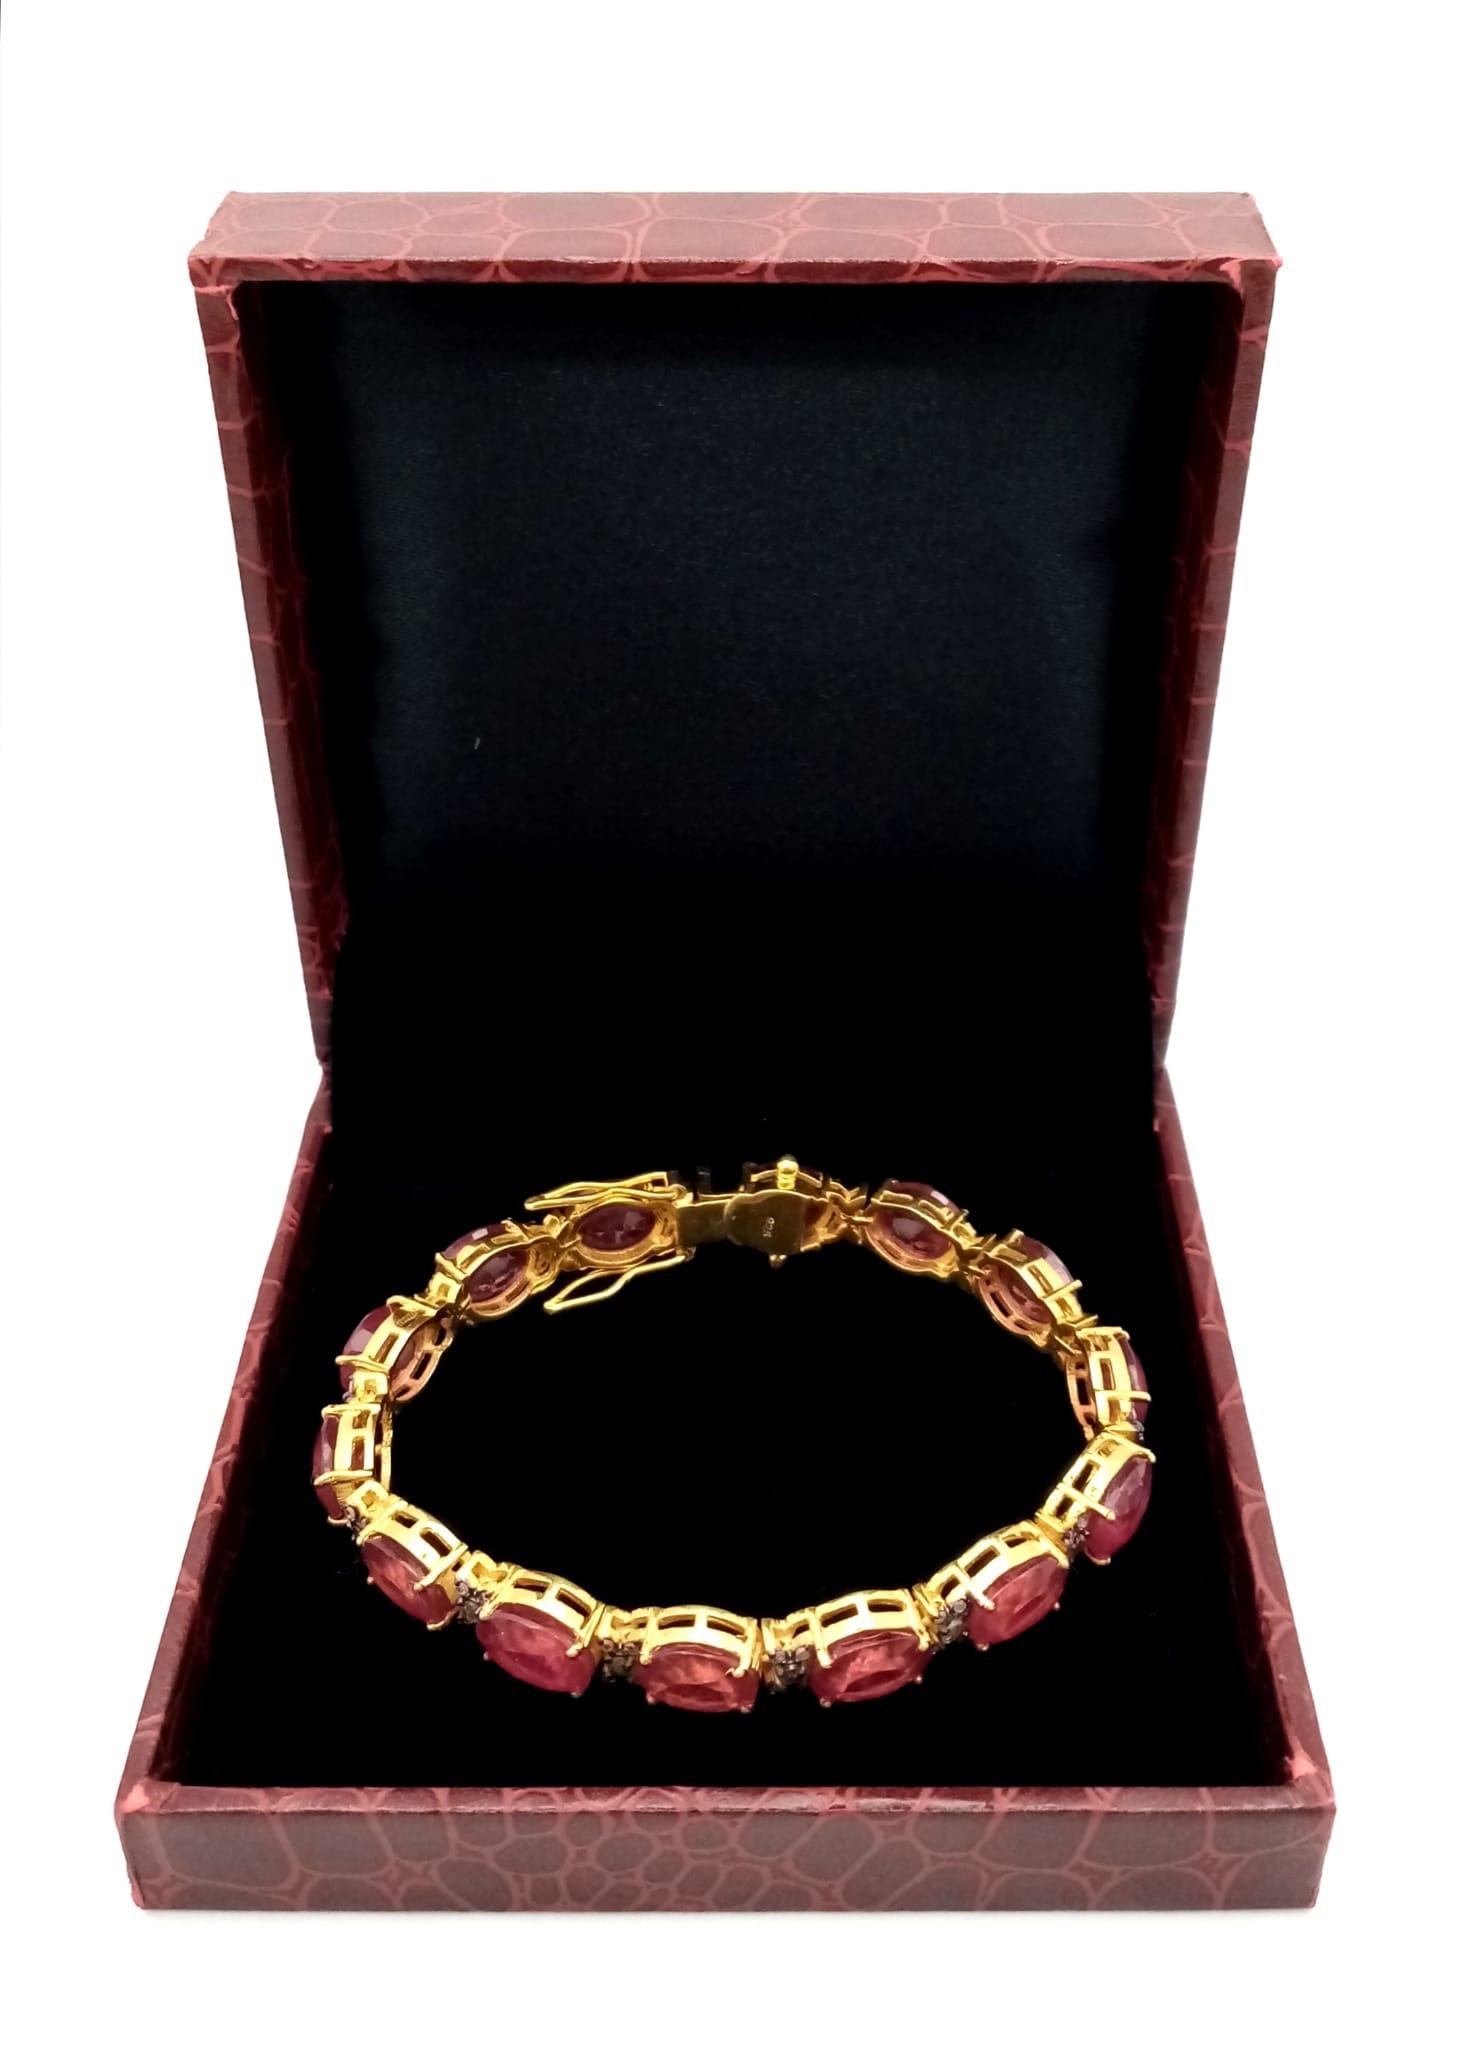 An Oval Cut Ruby and Diamond Gemstone Tennis Bracelet set in Gold Plated 925 Silver. 50ctw Rubies - Image 3 of 4